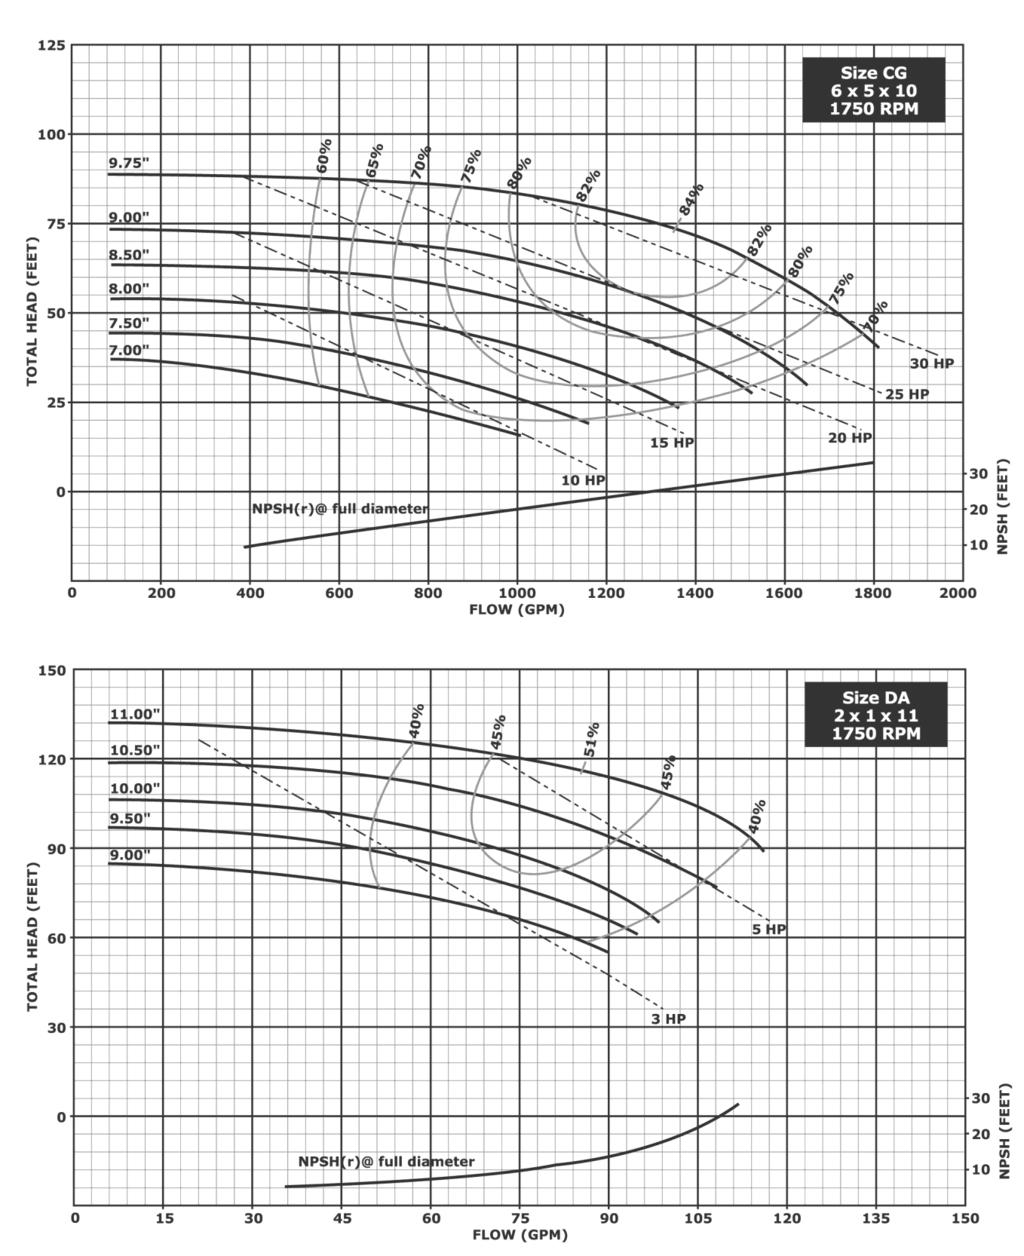 Hydraulic Performance - 10 and 11 Inch Impellers Size CG 6 x 6 x 10 1750 RPM Notes: 1. Above data is based on 1.0 sp. gr.